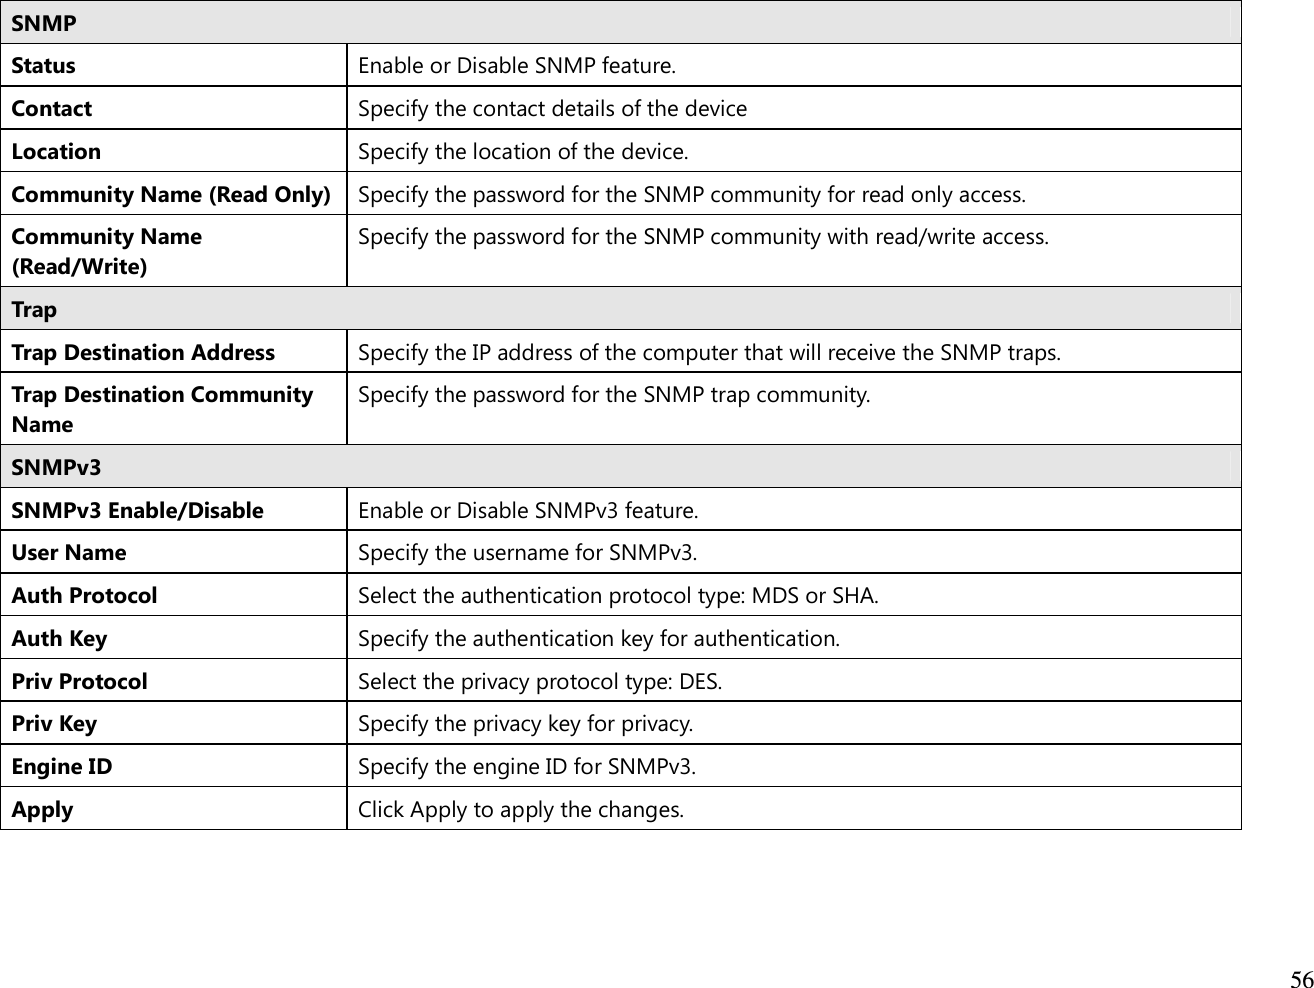  56  SNMP Status Enable or Disable SNMP feature. Contact Specify the contact details of the device Location Specify the location of the device. Community Name (Read Only) Specify the password for the SNMP community for read only access. Community Name (Read/Write) Specify the password for the SNMP community with read/write access. Trap Trap Destination Address Specify the IP address of the computer that will receive the SNMP traps. Trap Destination Community Name Specify the password for the SNMP trap community. SNMPv3 SNMPv3 Enable/Disable Enable or Disable SNMPv3 feature. User Name Specify the username for SNMPv3. Auth Protocol Select the authentication protocol type: MDS or SHA. Auth Key Specify the authentication key for authentication. Priv Protocol Select the privacy protocol type: DES. Priv Key Specify the privacy key for privacy. Engine ID Specify the engine ID for SNMPv3. Apply Click Apply to apply the changes.  